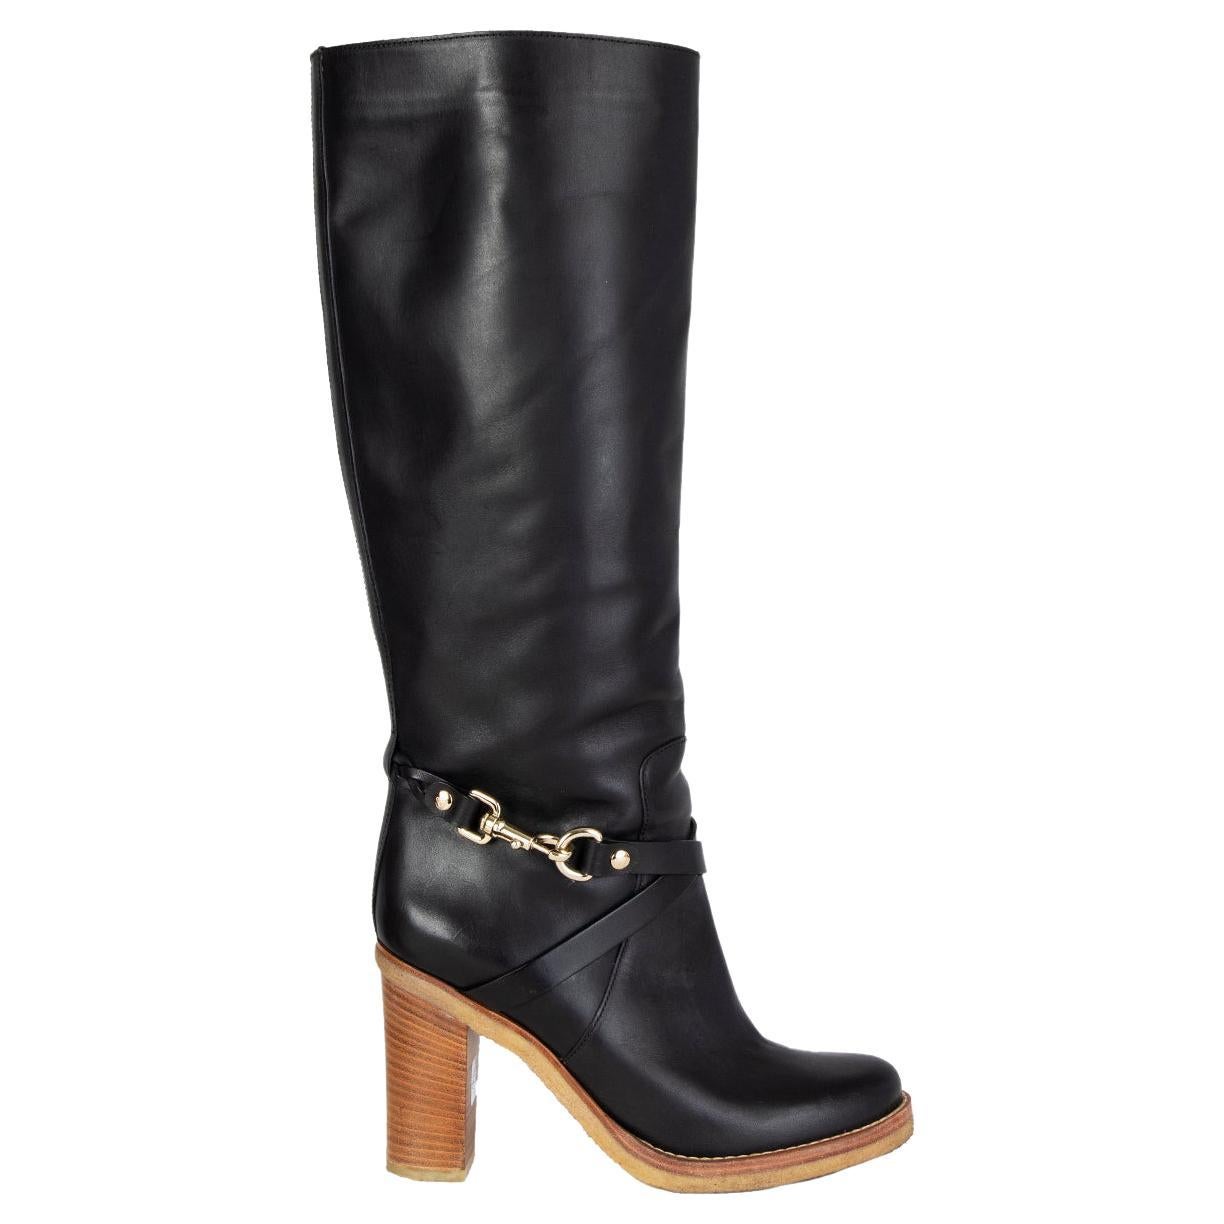 MULBERRY black leather DORSET Knee High Boots Shoes 40